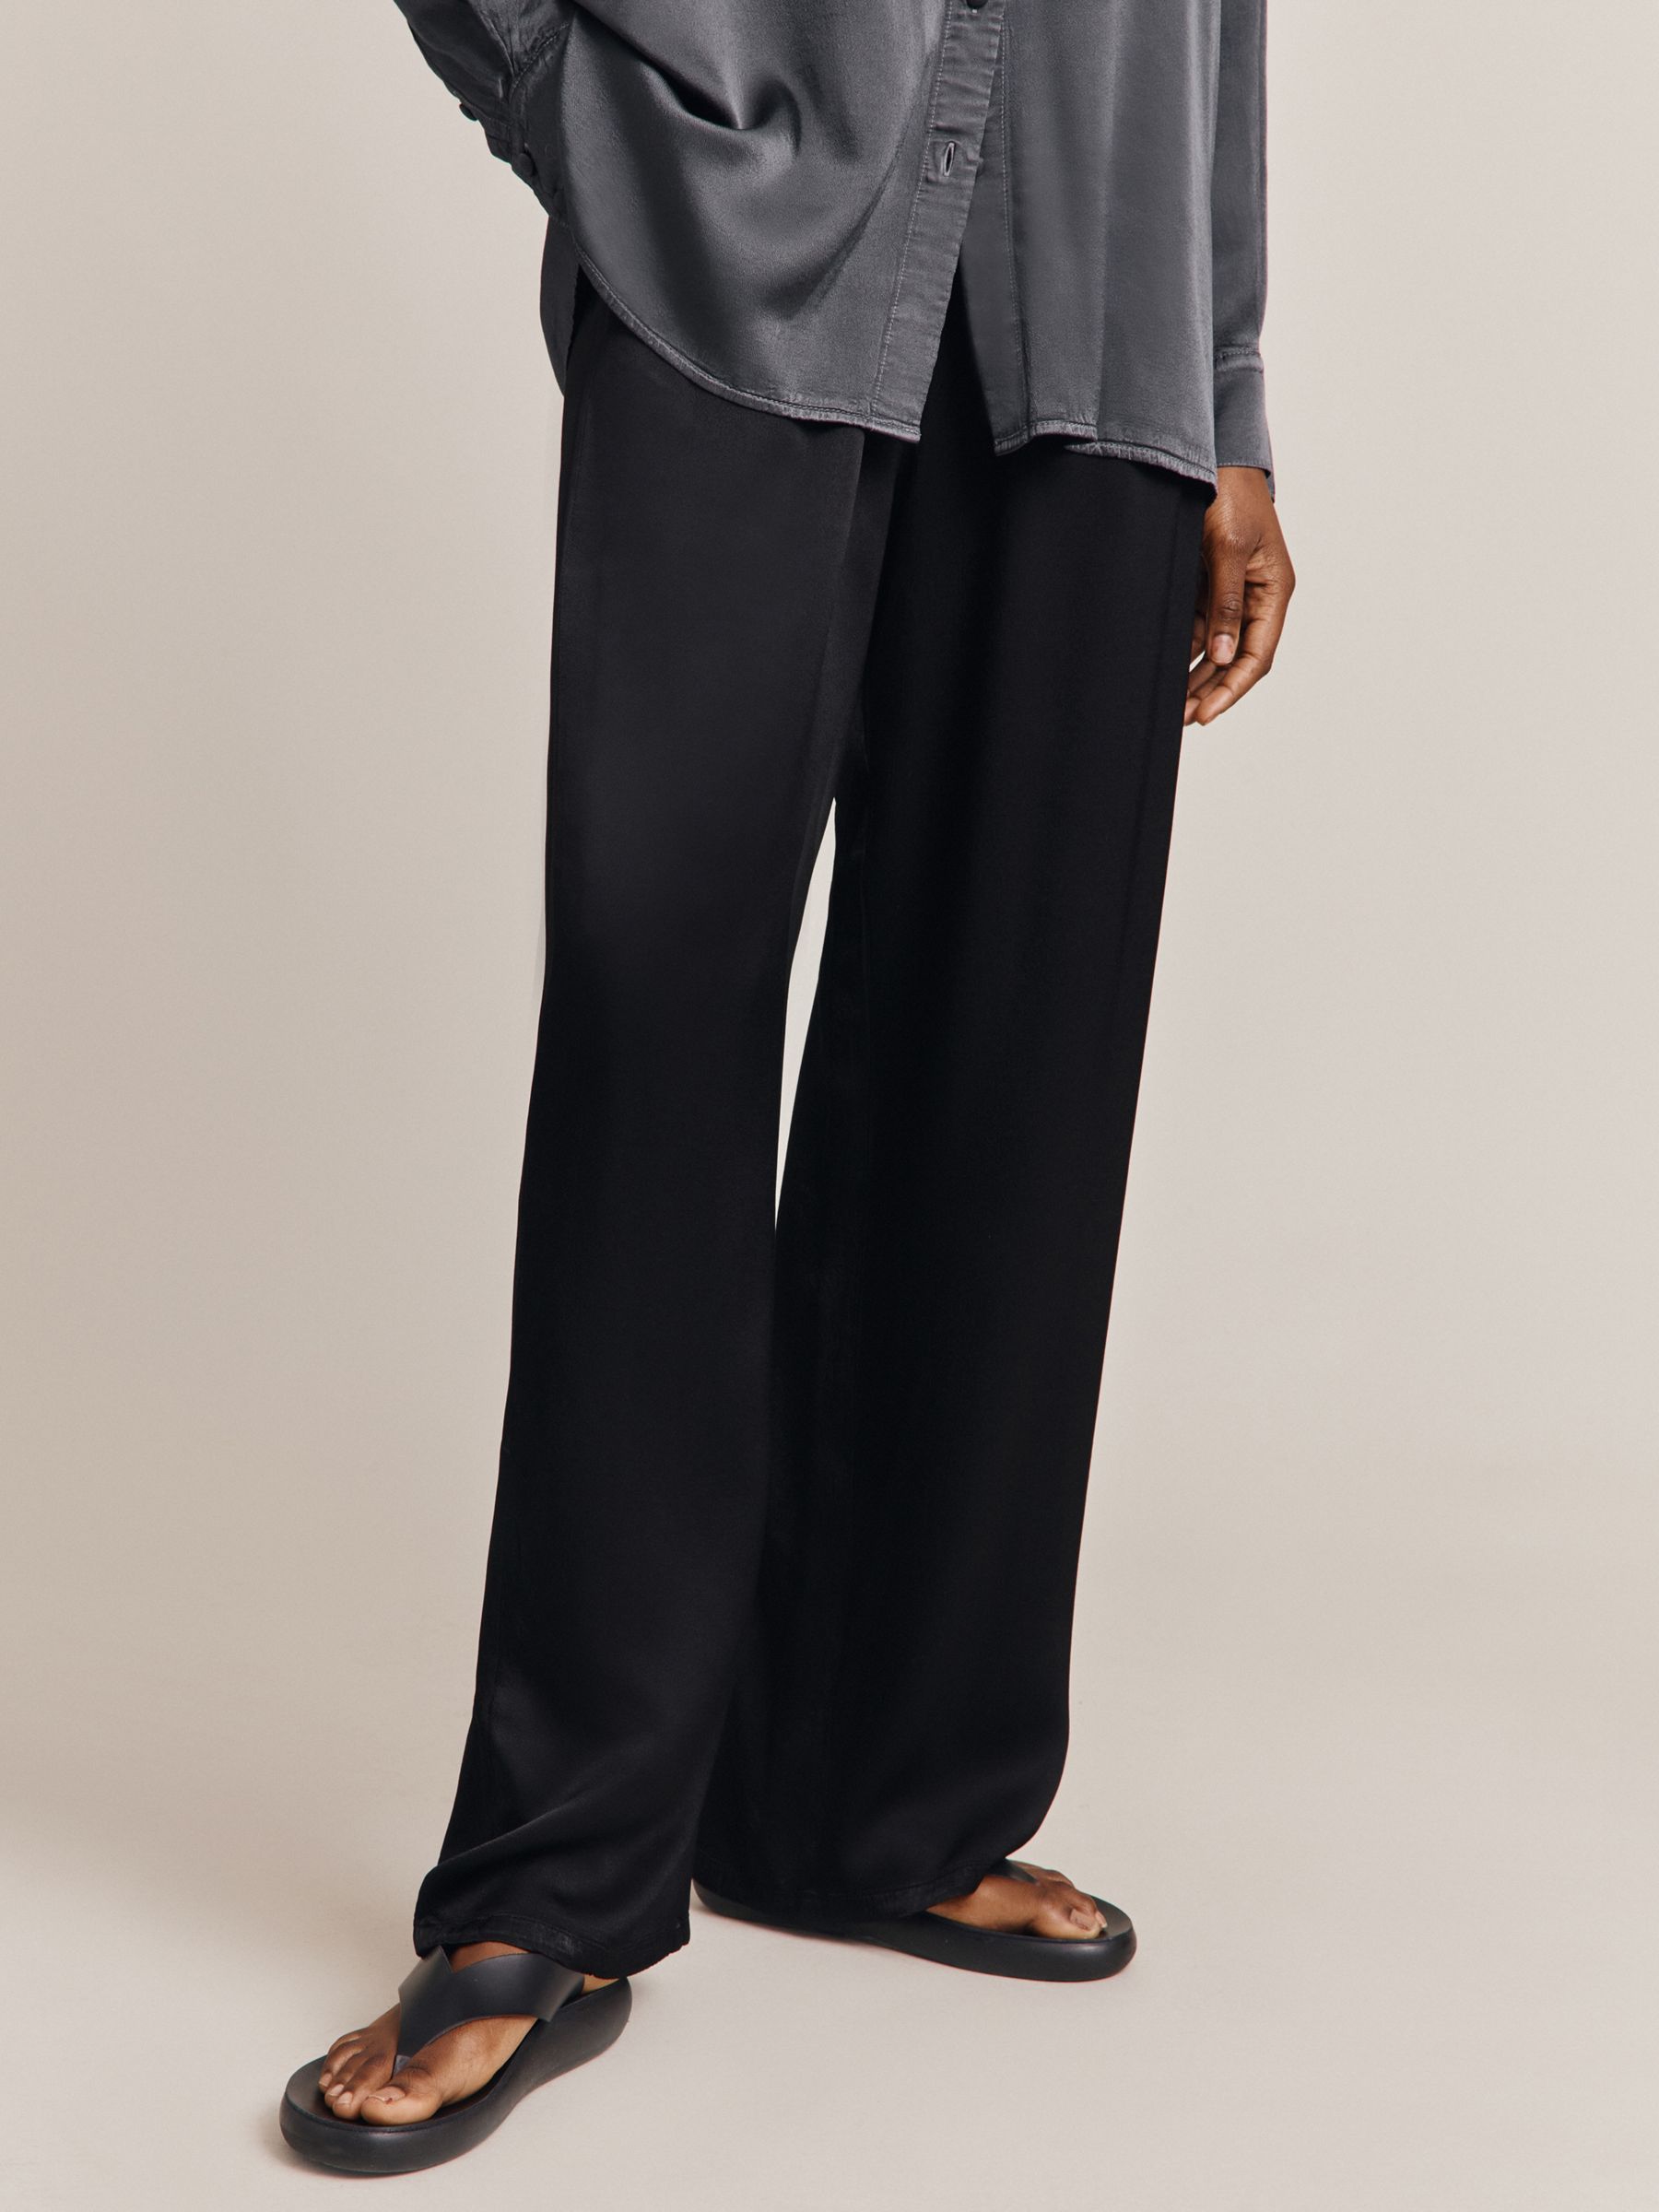 Buy Ghost Imogen Satin Trousers Online at johnlewis.com